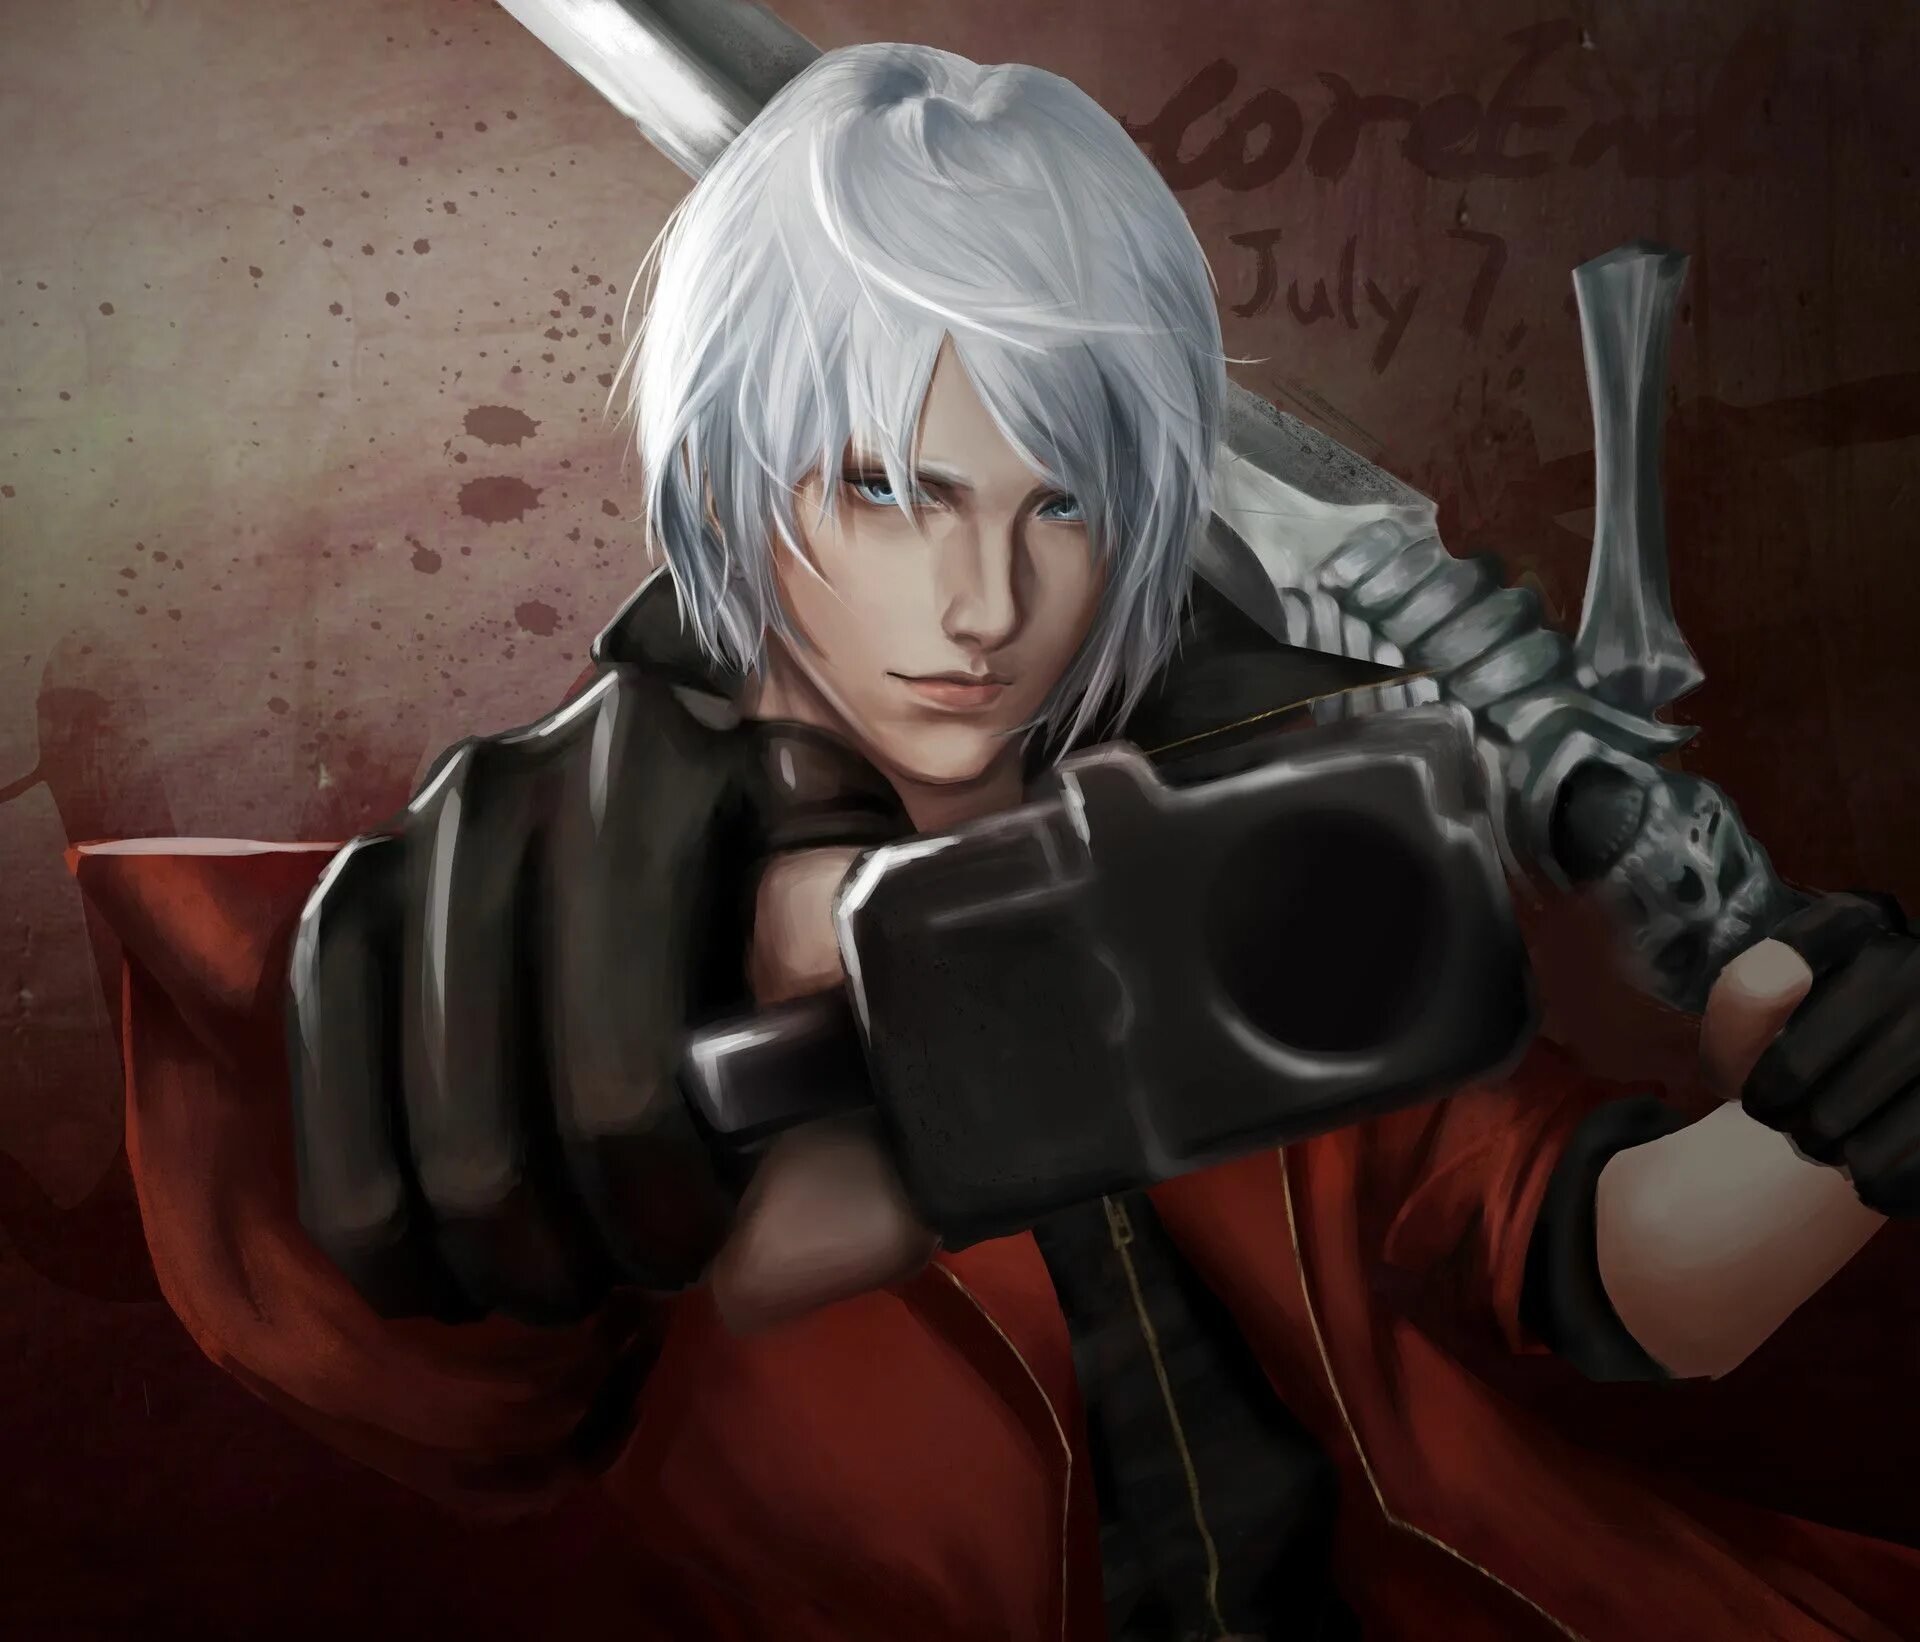 Devil may cry новелла. Данте Devil May Cry. Данте ДМС 4. Devil May Cry 4 Dante.